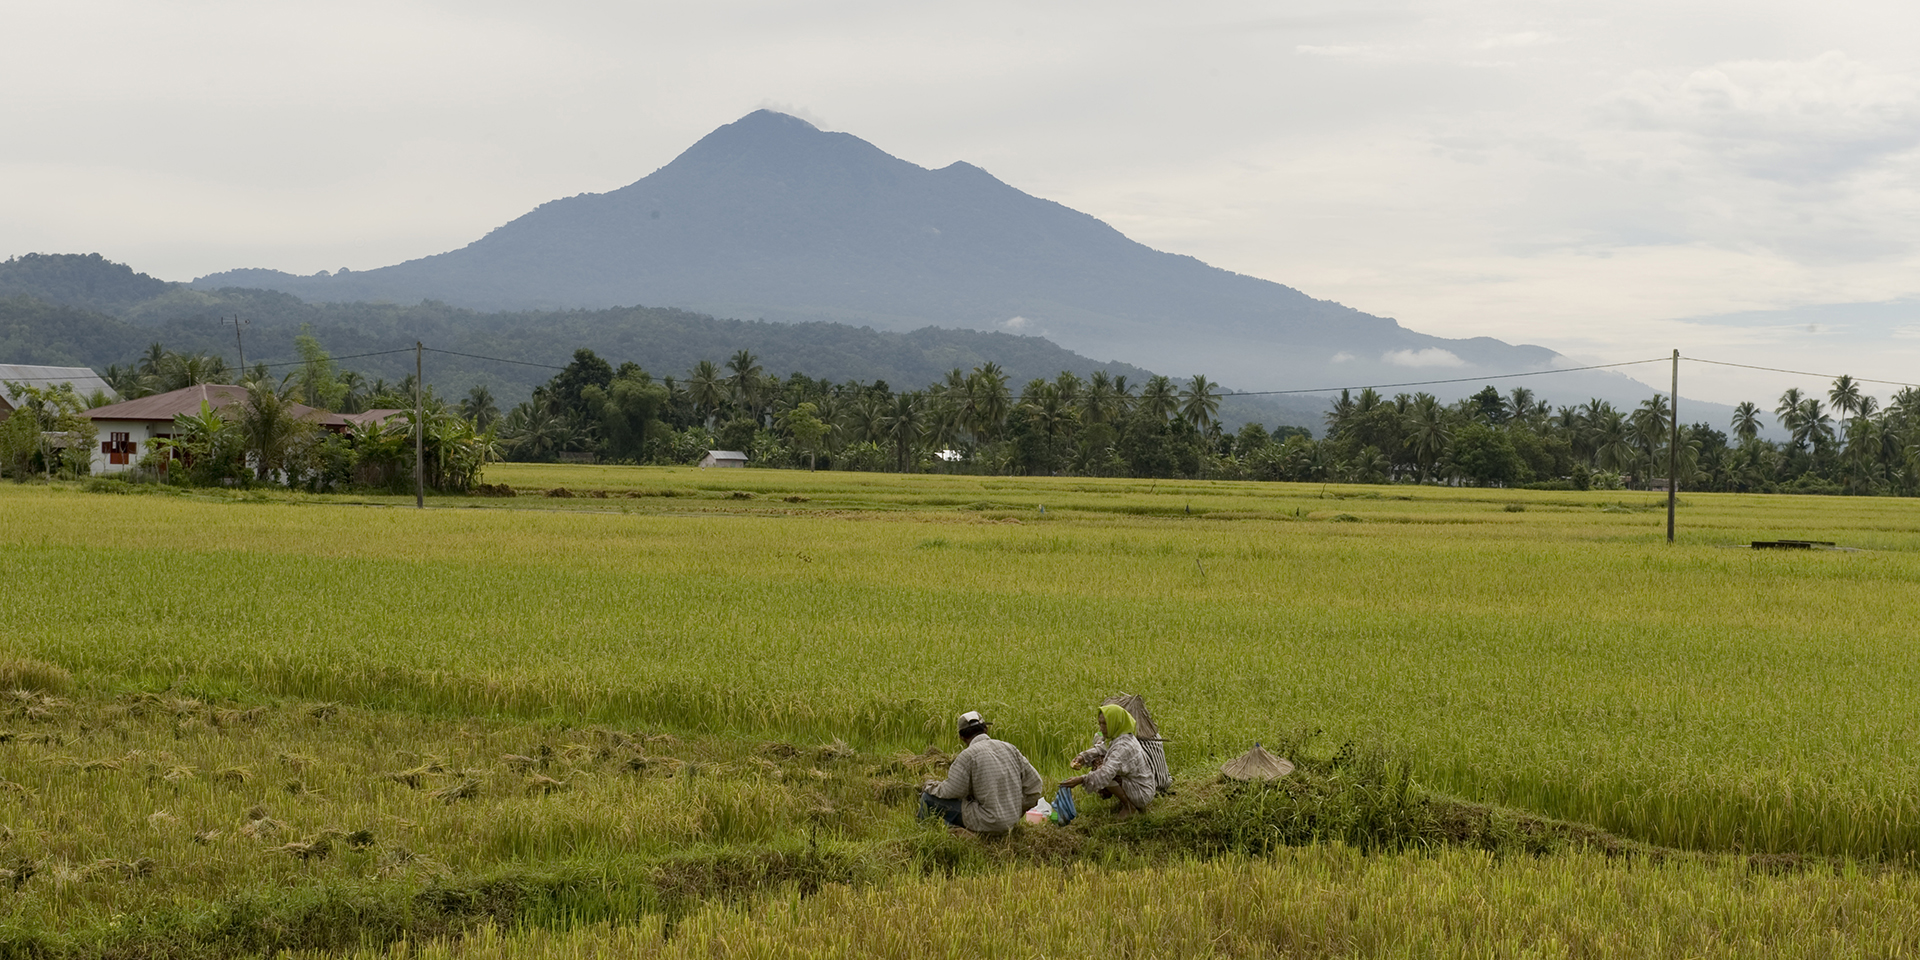 Image of people sitting in the middle of a large swath of farmland with mountains in the distance.